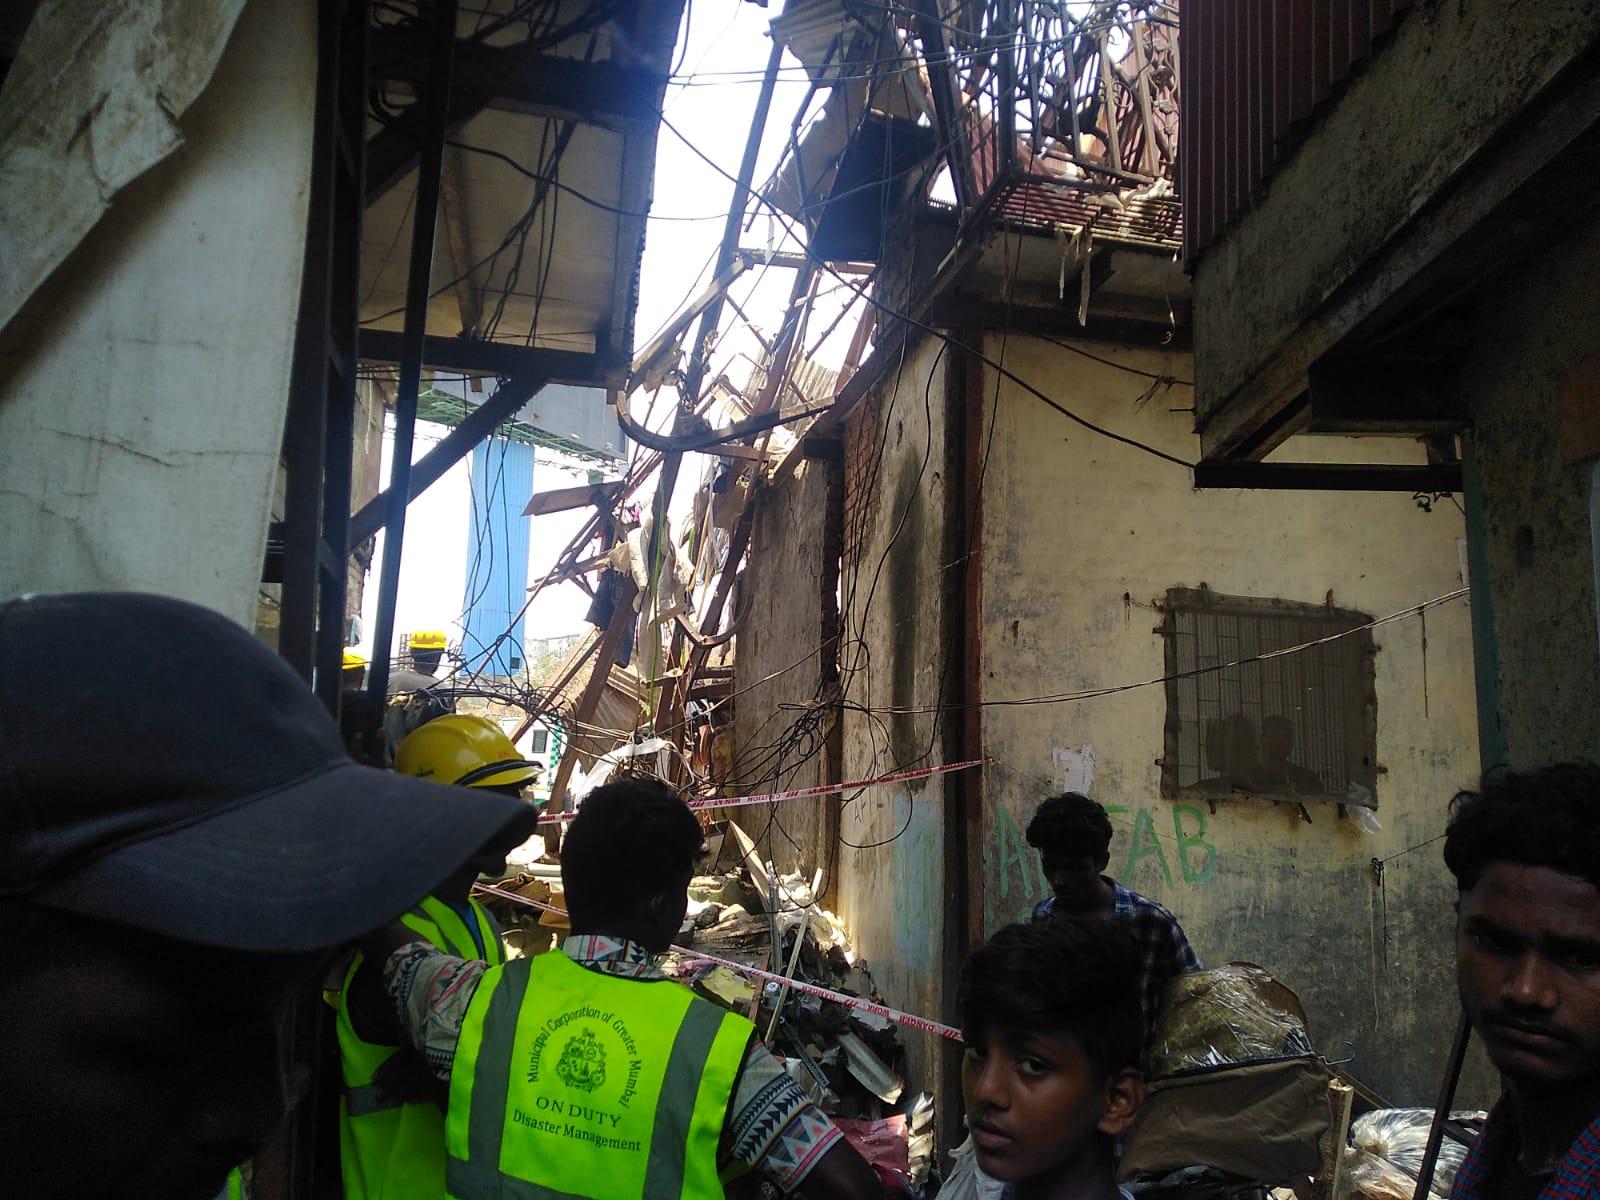 A civic official told PTI that a rescue operation is underway to search for three to four persons believed to be under the rubble. Pic/Anagha Sawant